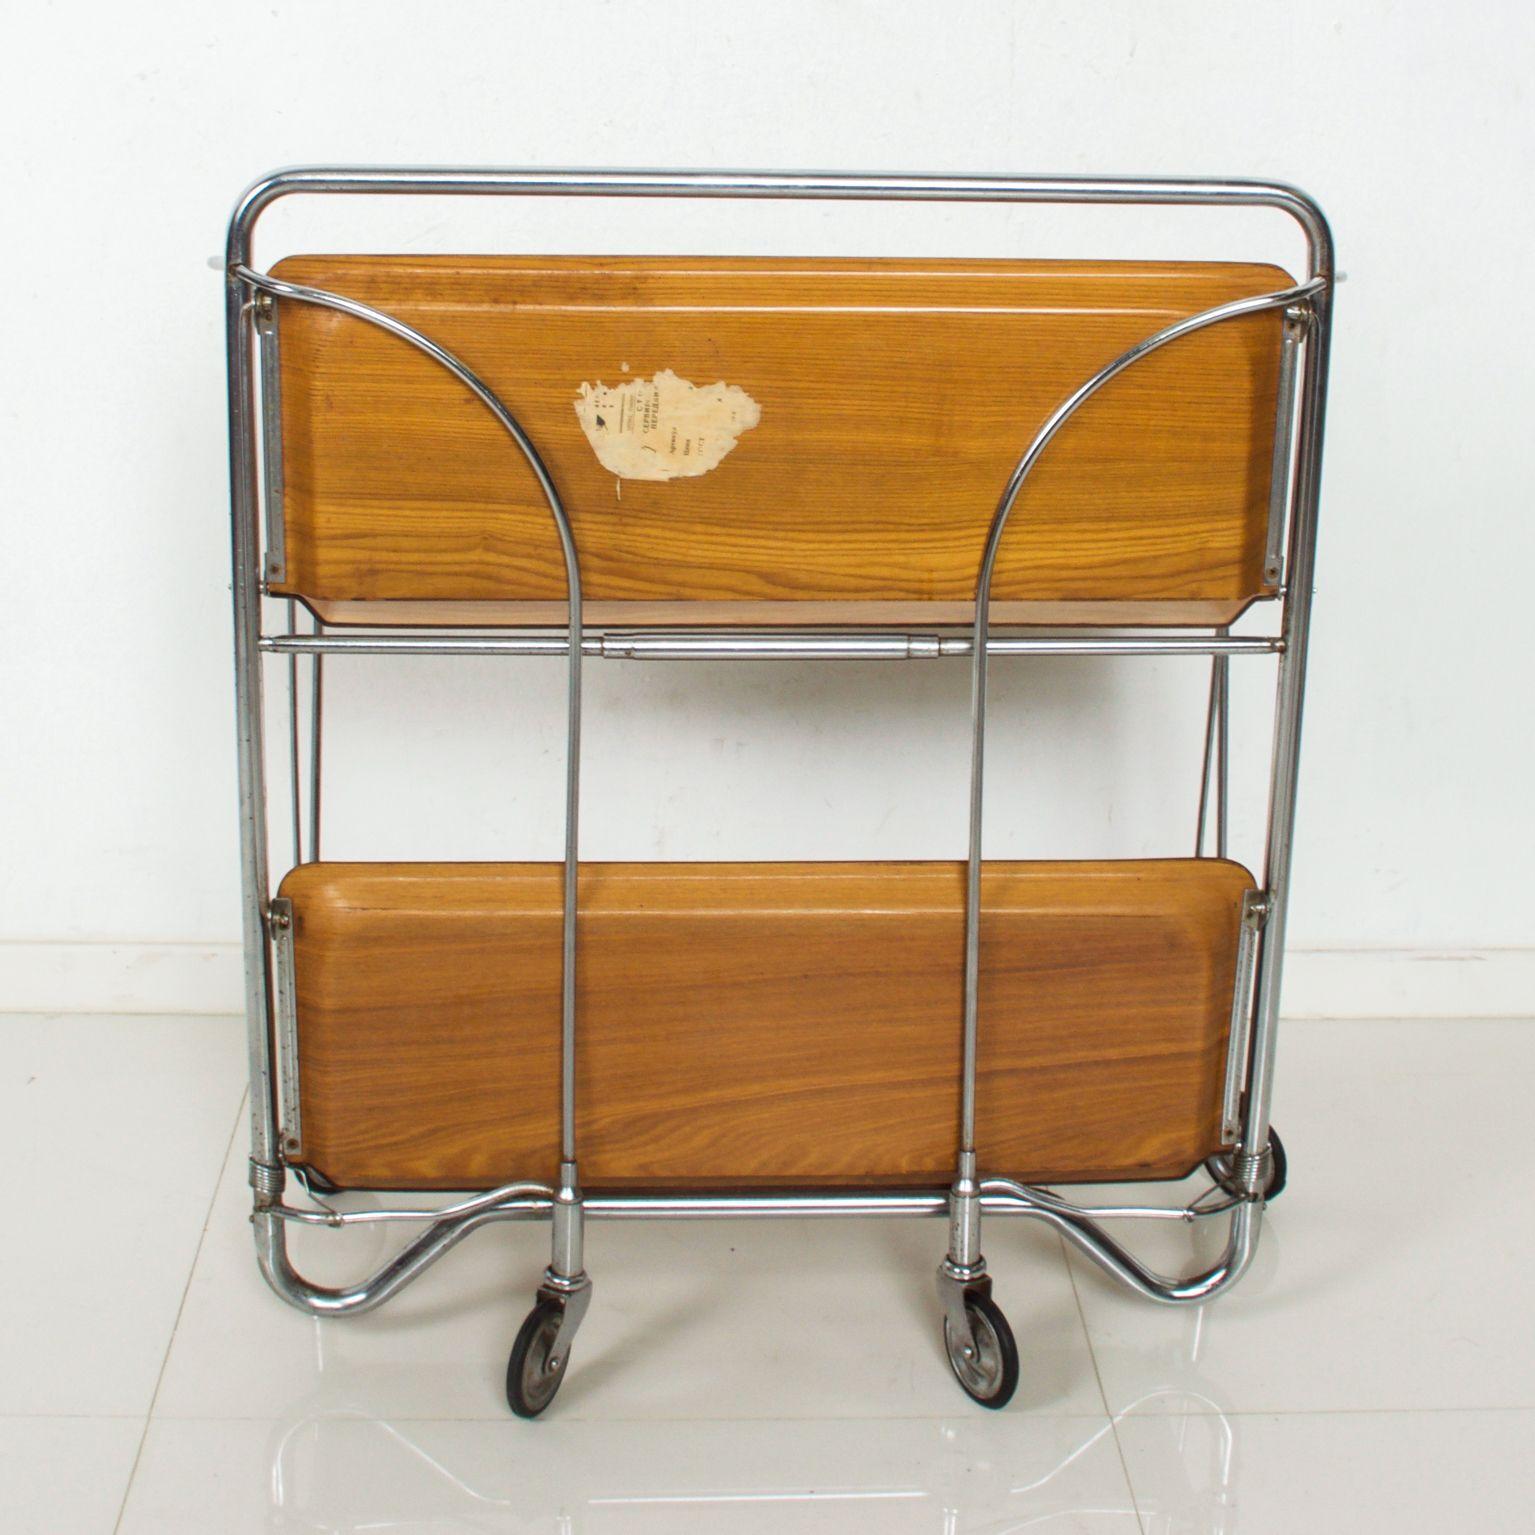 For your pleasure: Russian service tea cart foldable compact design trolley bar service bar by Bremshey AG, USSR, 1955

Two labels present. Unreadable.

Dimensions: 30 1/2